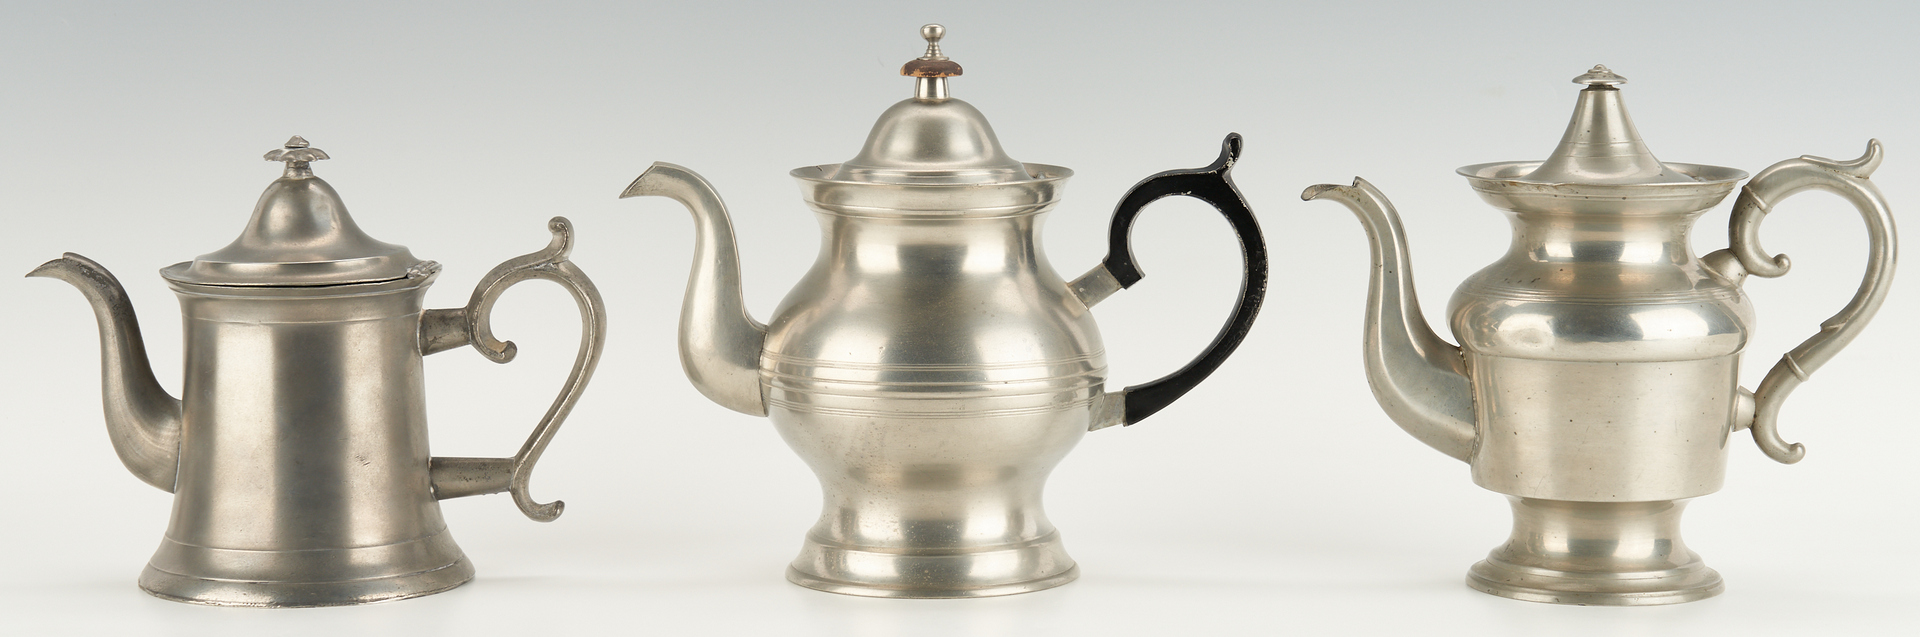 Lot 272: 5 American Pewter Tea and Coffee Pots, incl. Derby, Gleason, Ward, Dunham